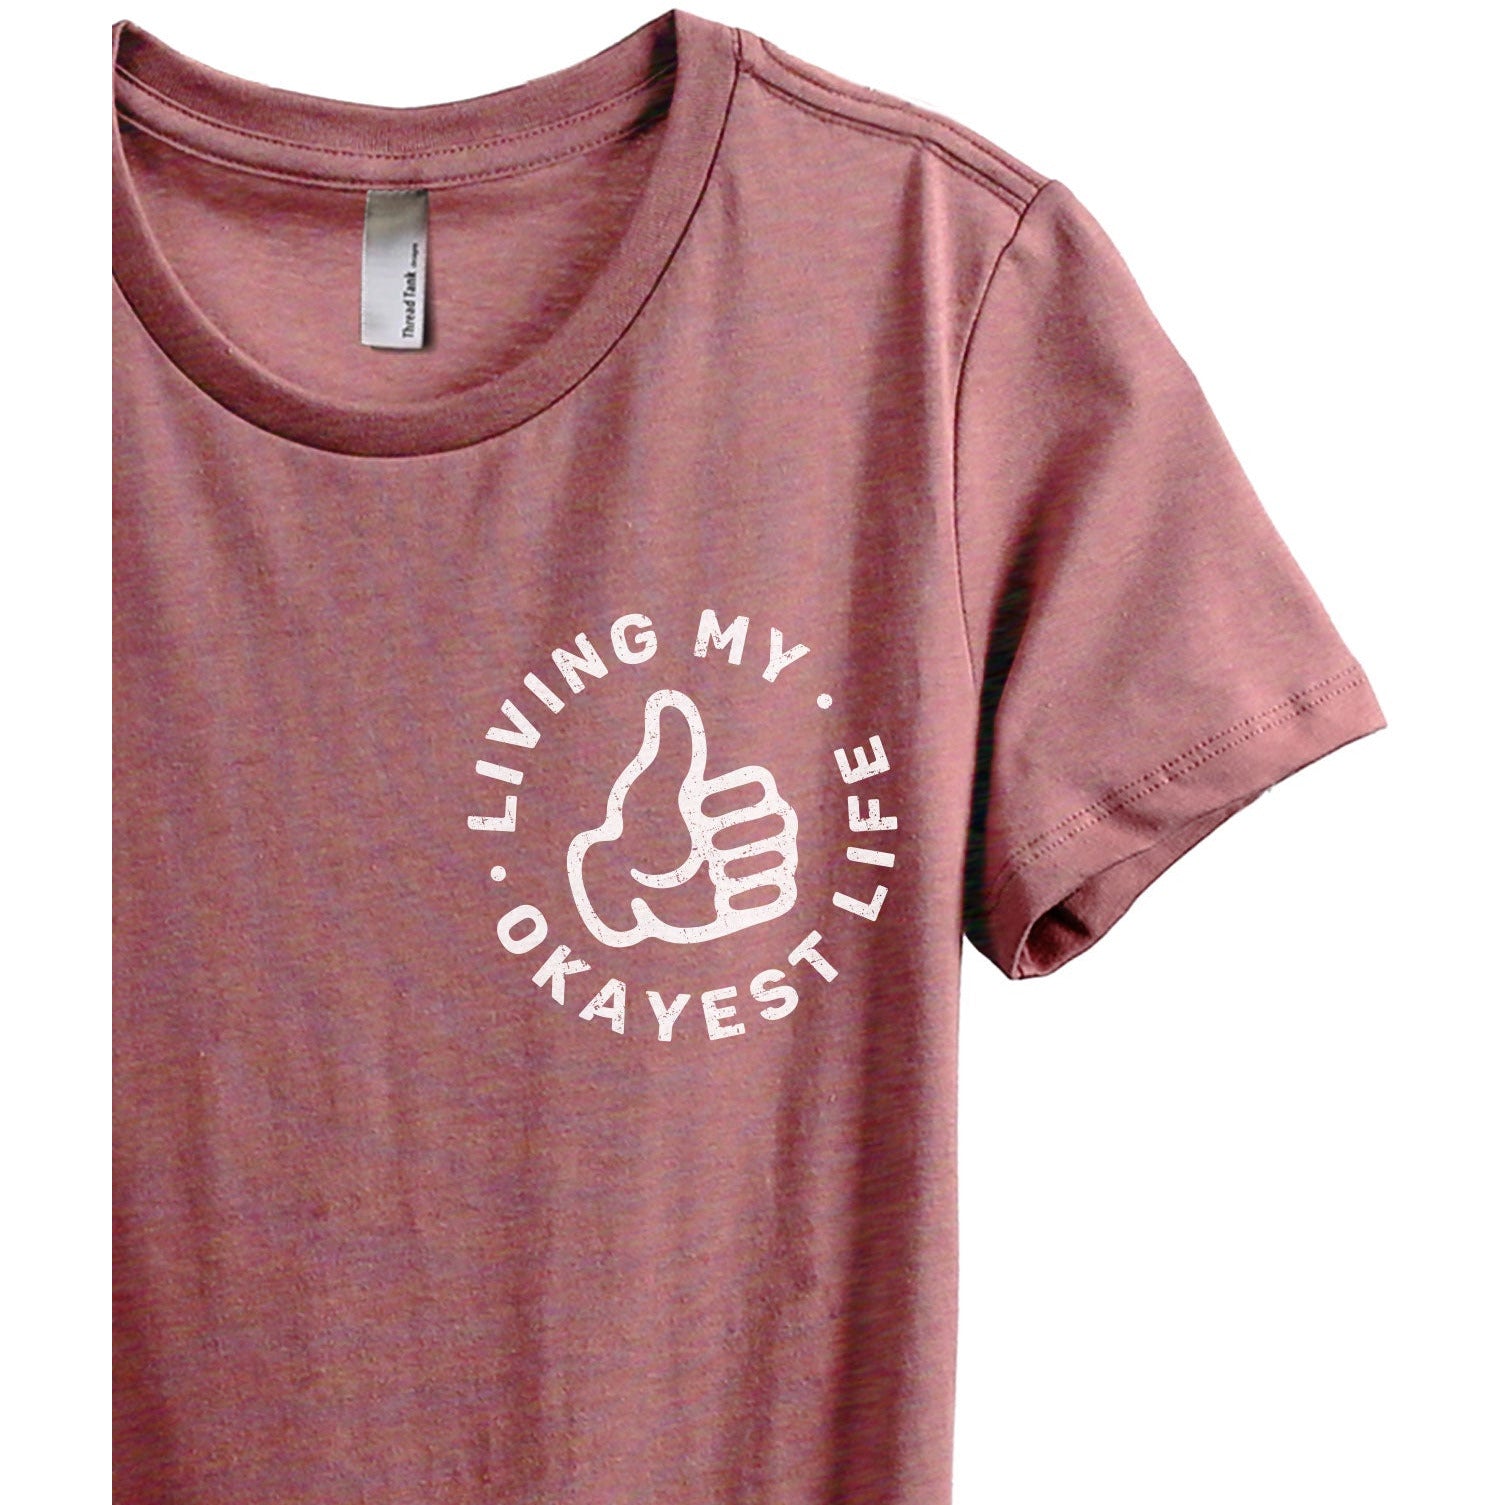 Living My Okayest Life Women's Relaxed Crewneck T-Shirt Top Tee Heather Rouge Zoom Details
